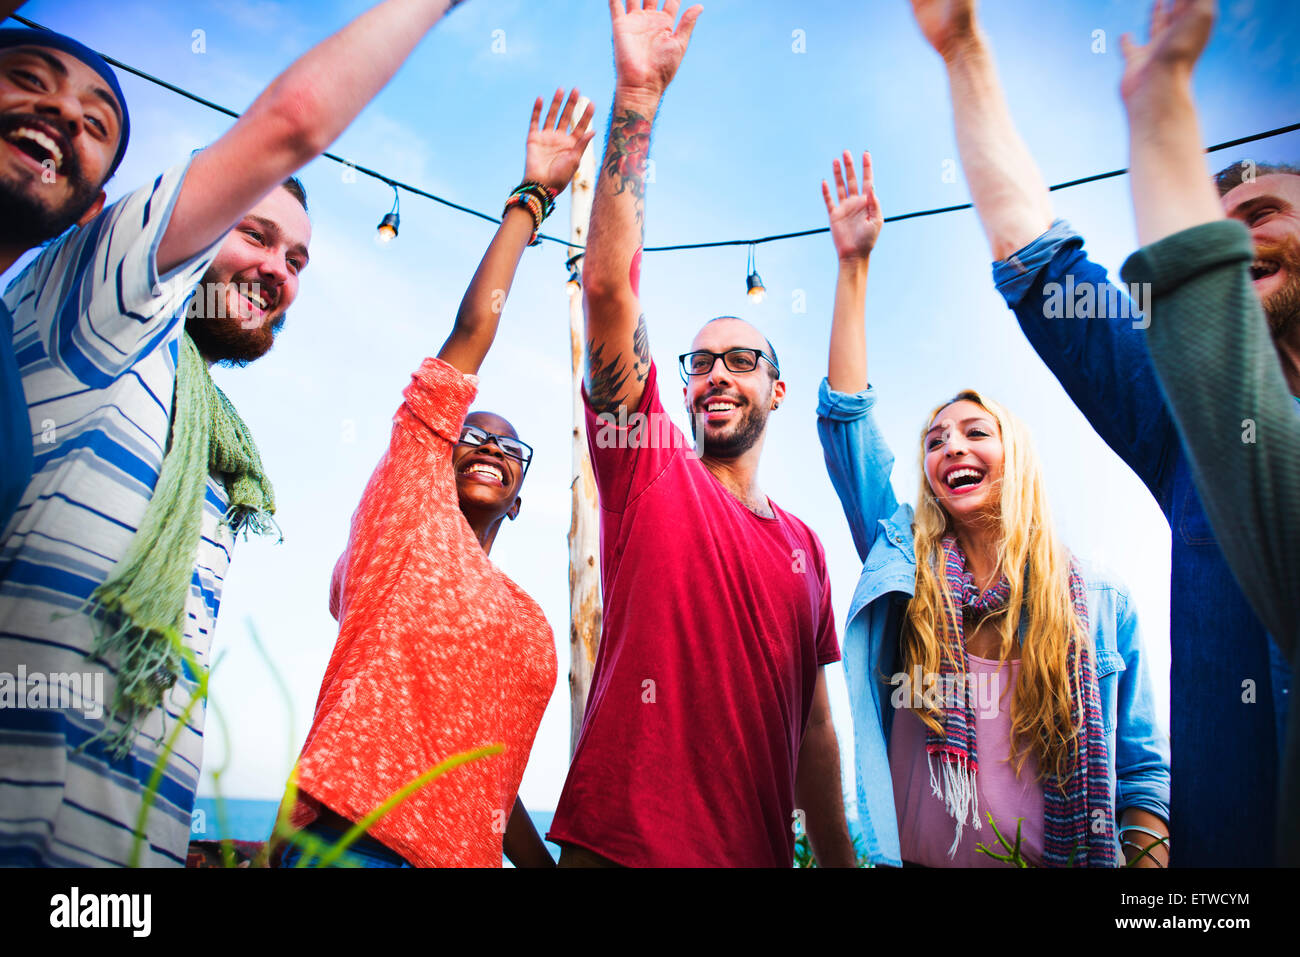 Beach Party Dinner Friendship Happiness Summer Concept Stock Photo